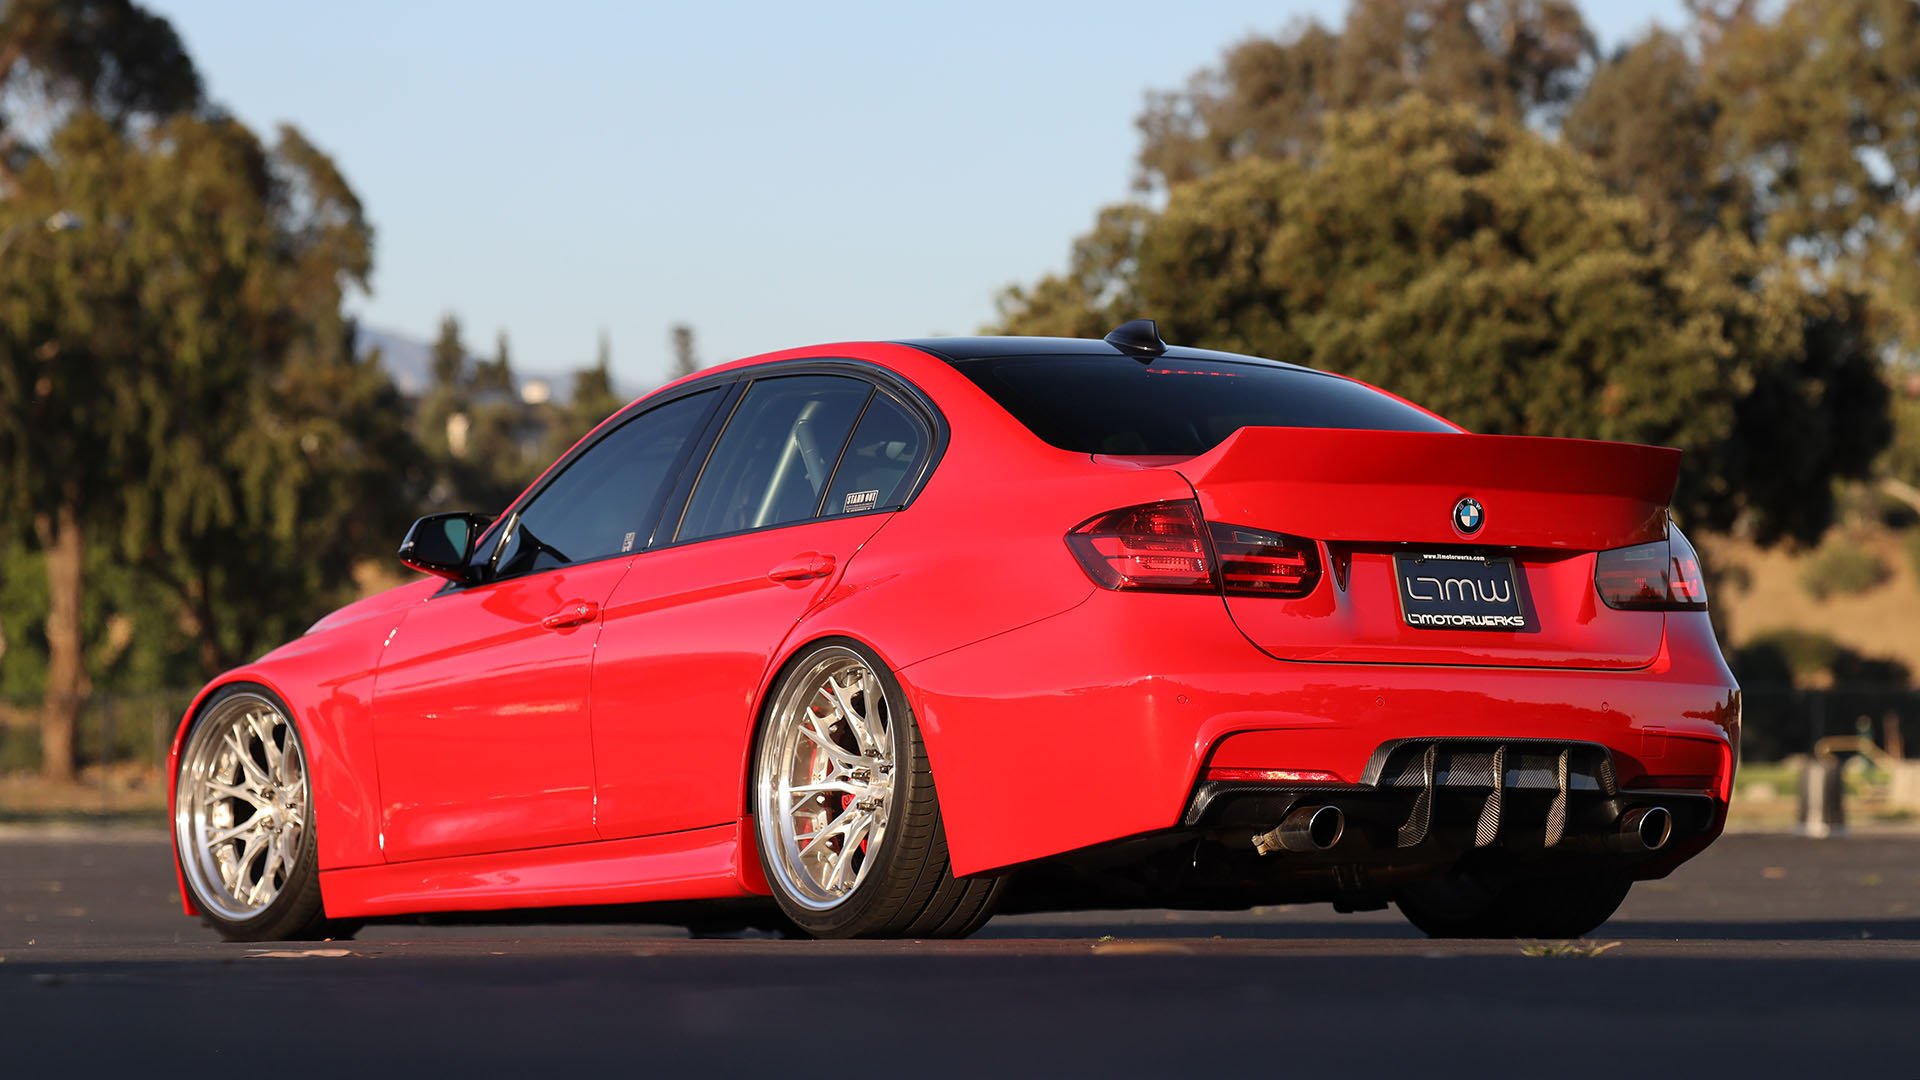 BMW F30 Chassis